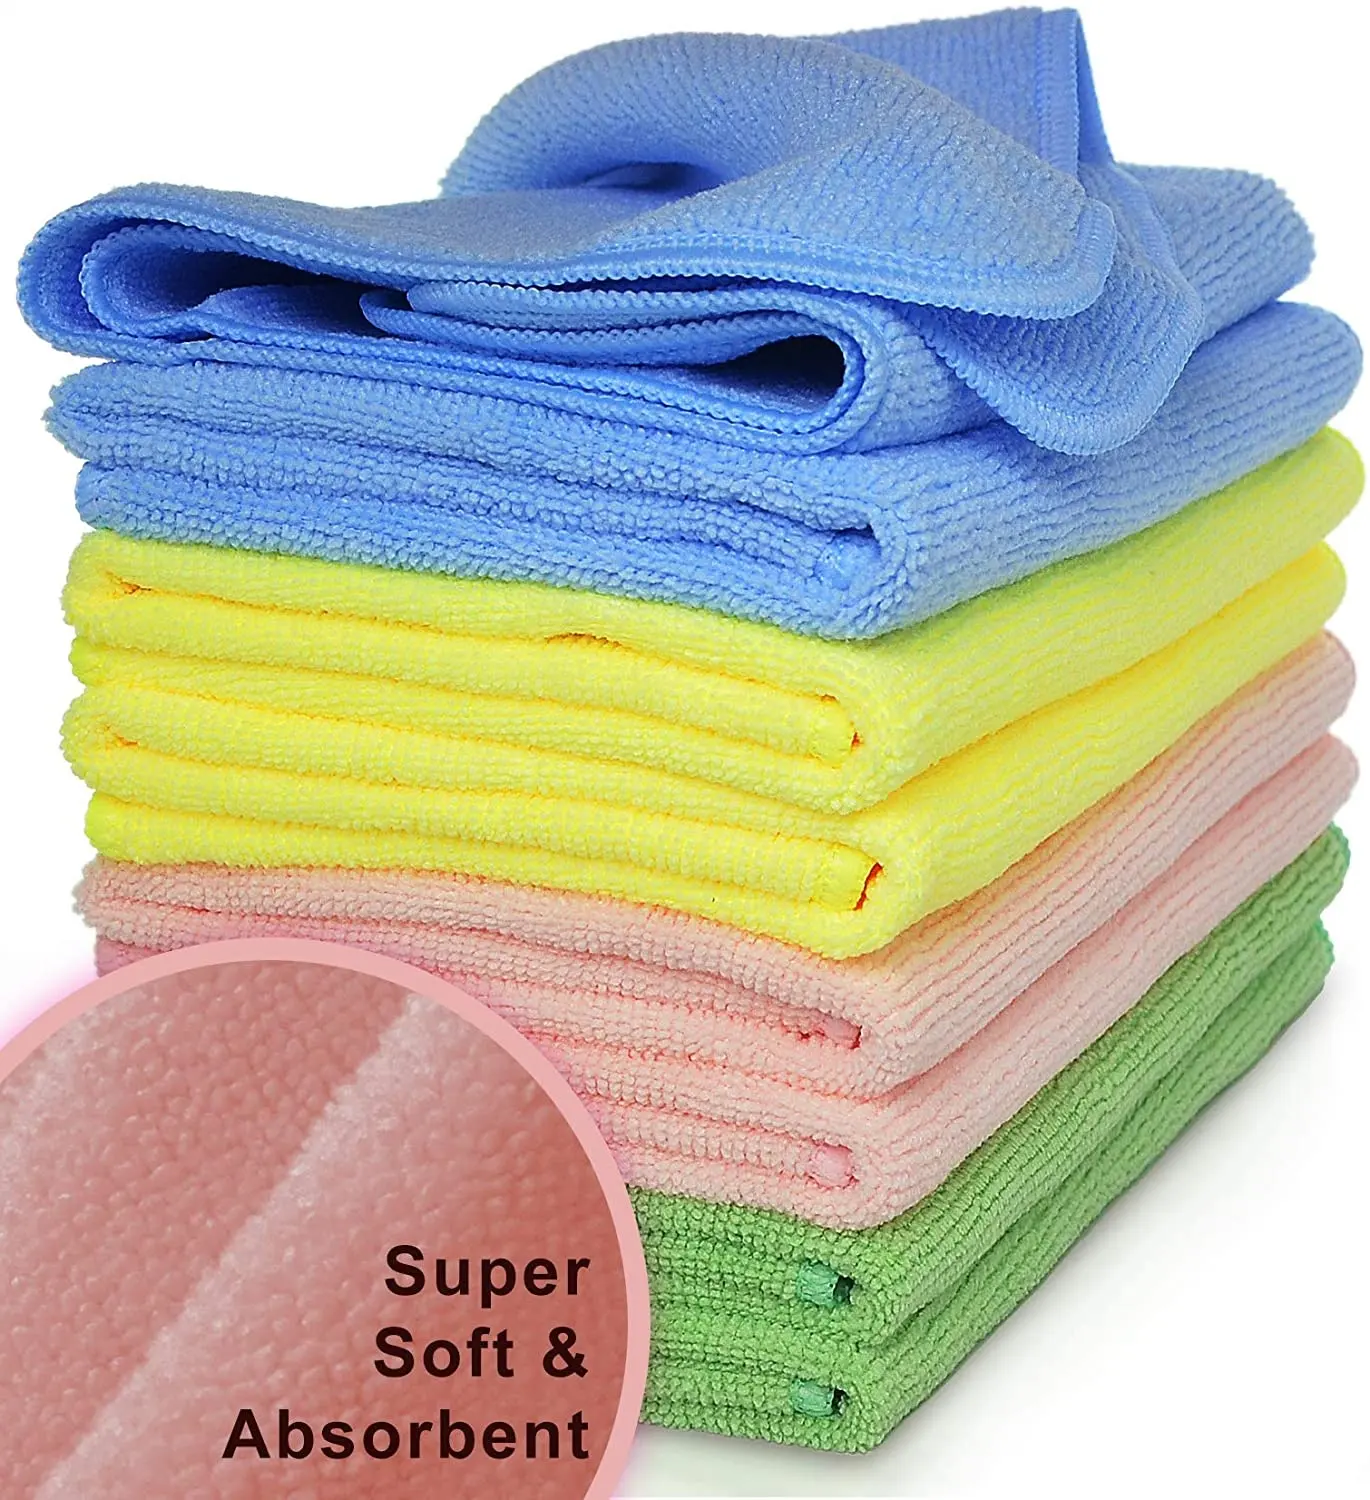 Microfiber Cleaning Cloth 8-Pack, Large Size 14.2"x14.2", Trap Dust, Dirt and Pet Dander in Split Fibers. Absorb up to 5X Their